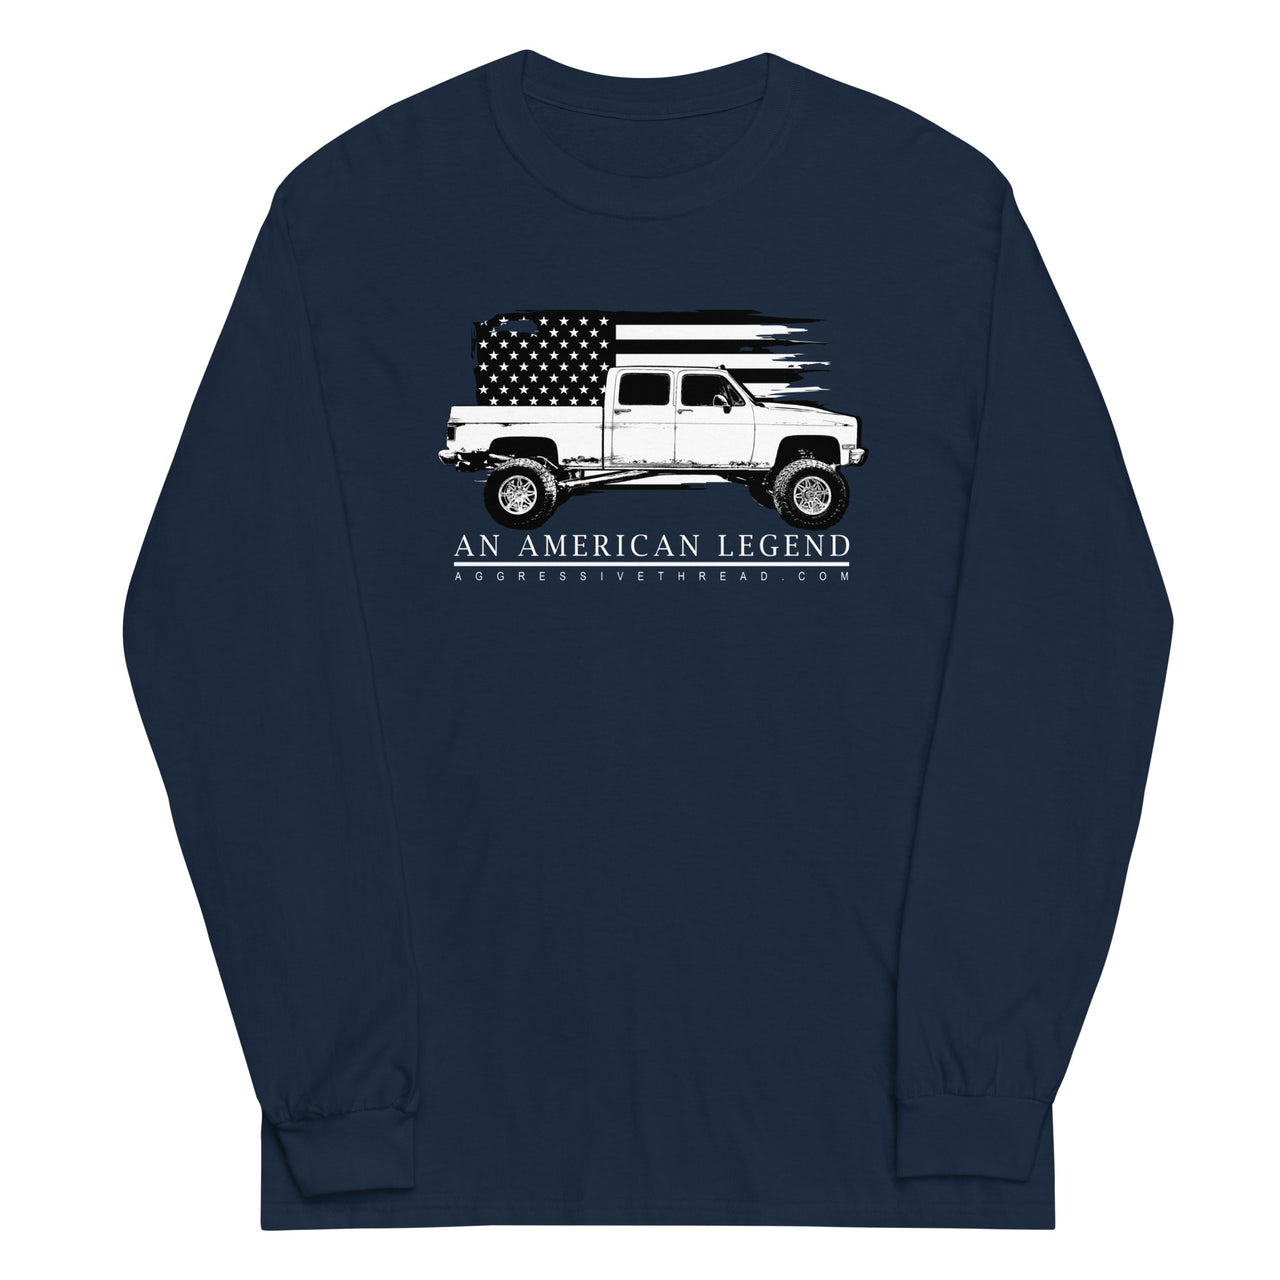 Crew Cab Square Body Truck Long Sleeve T-Shirt in navy